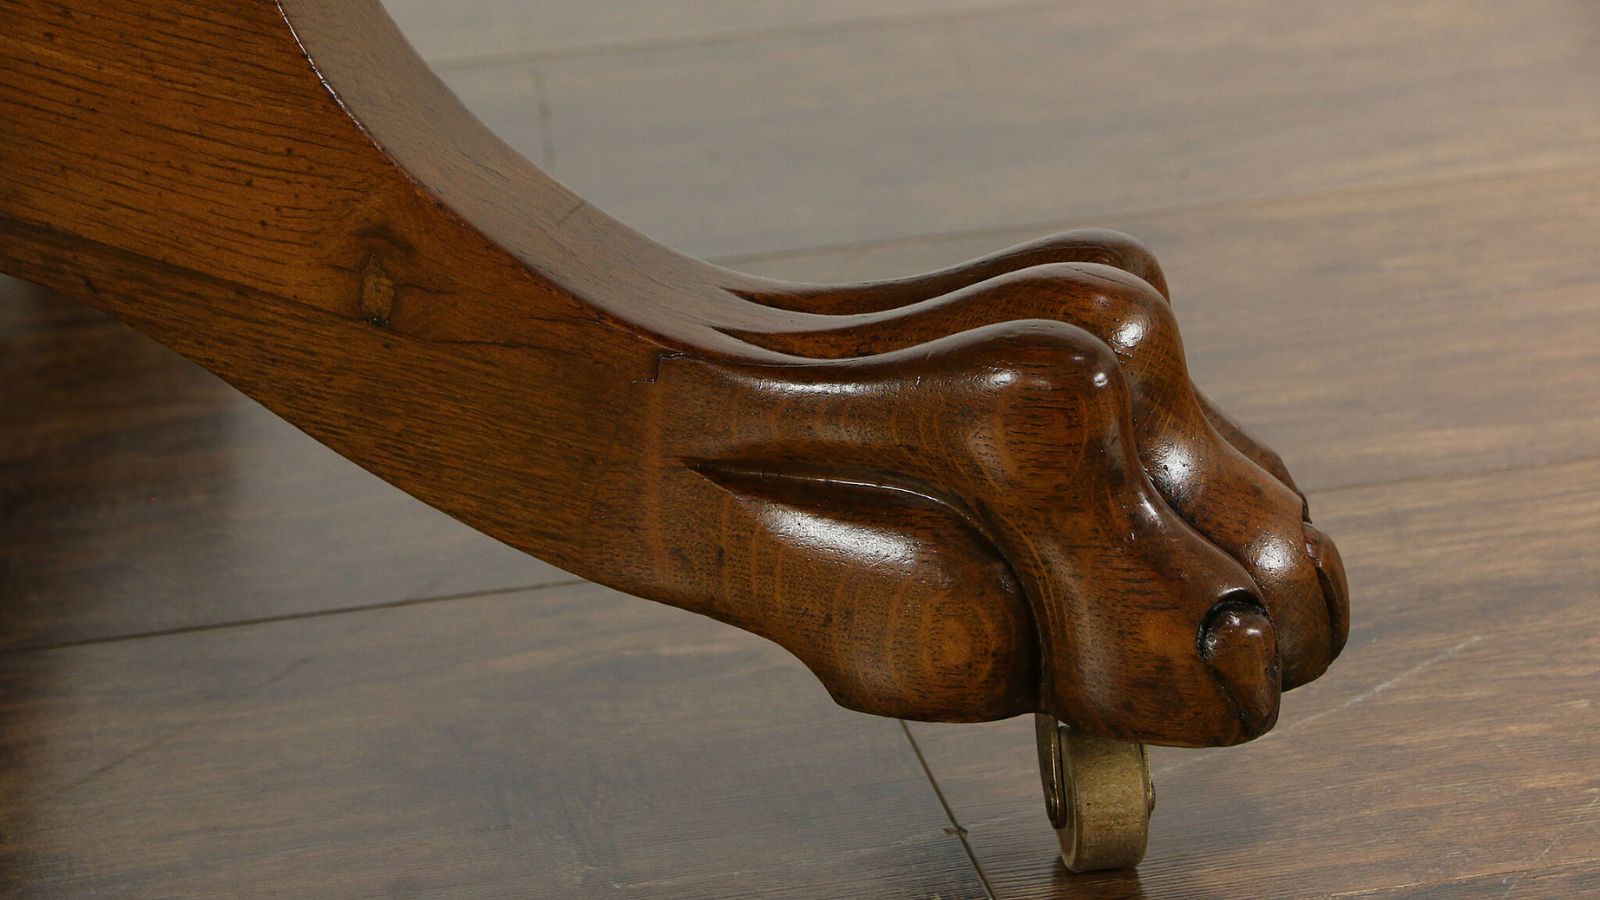 How to Date Antique Furniture by Feet